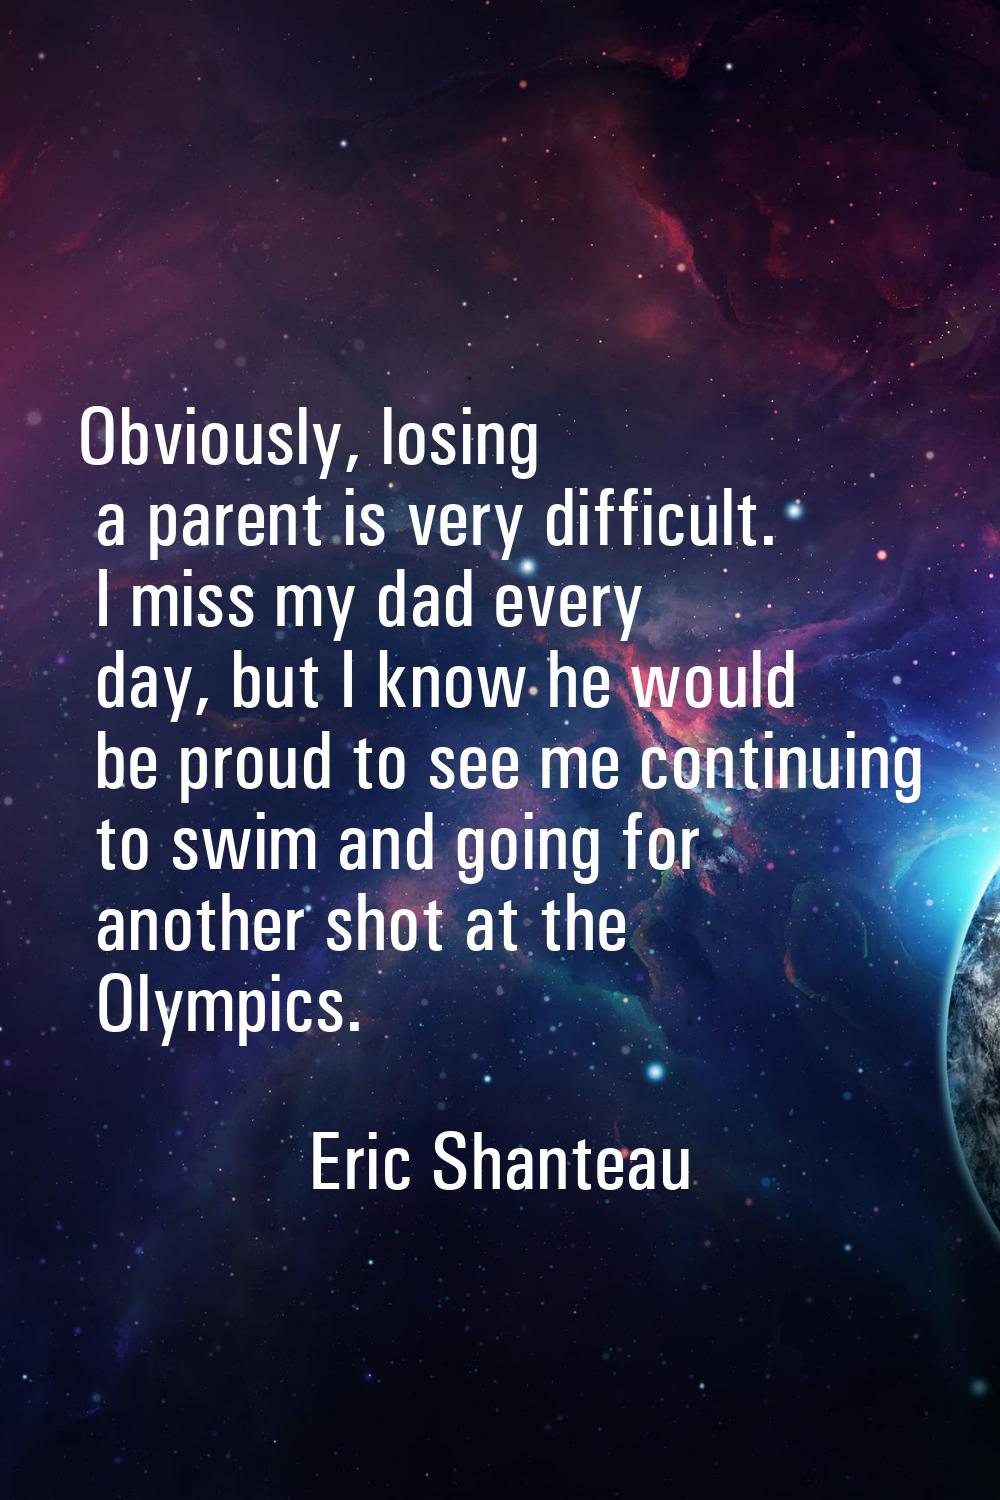 Obviously, losing a parent is very difficult. I miss my dad every day, but I know he would be proud